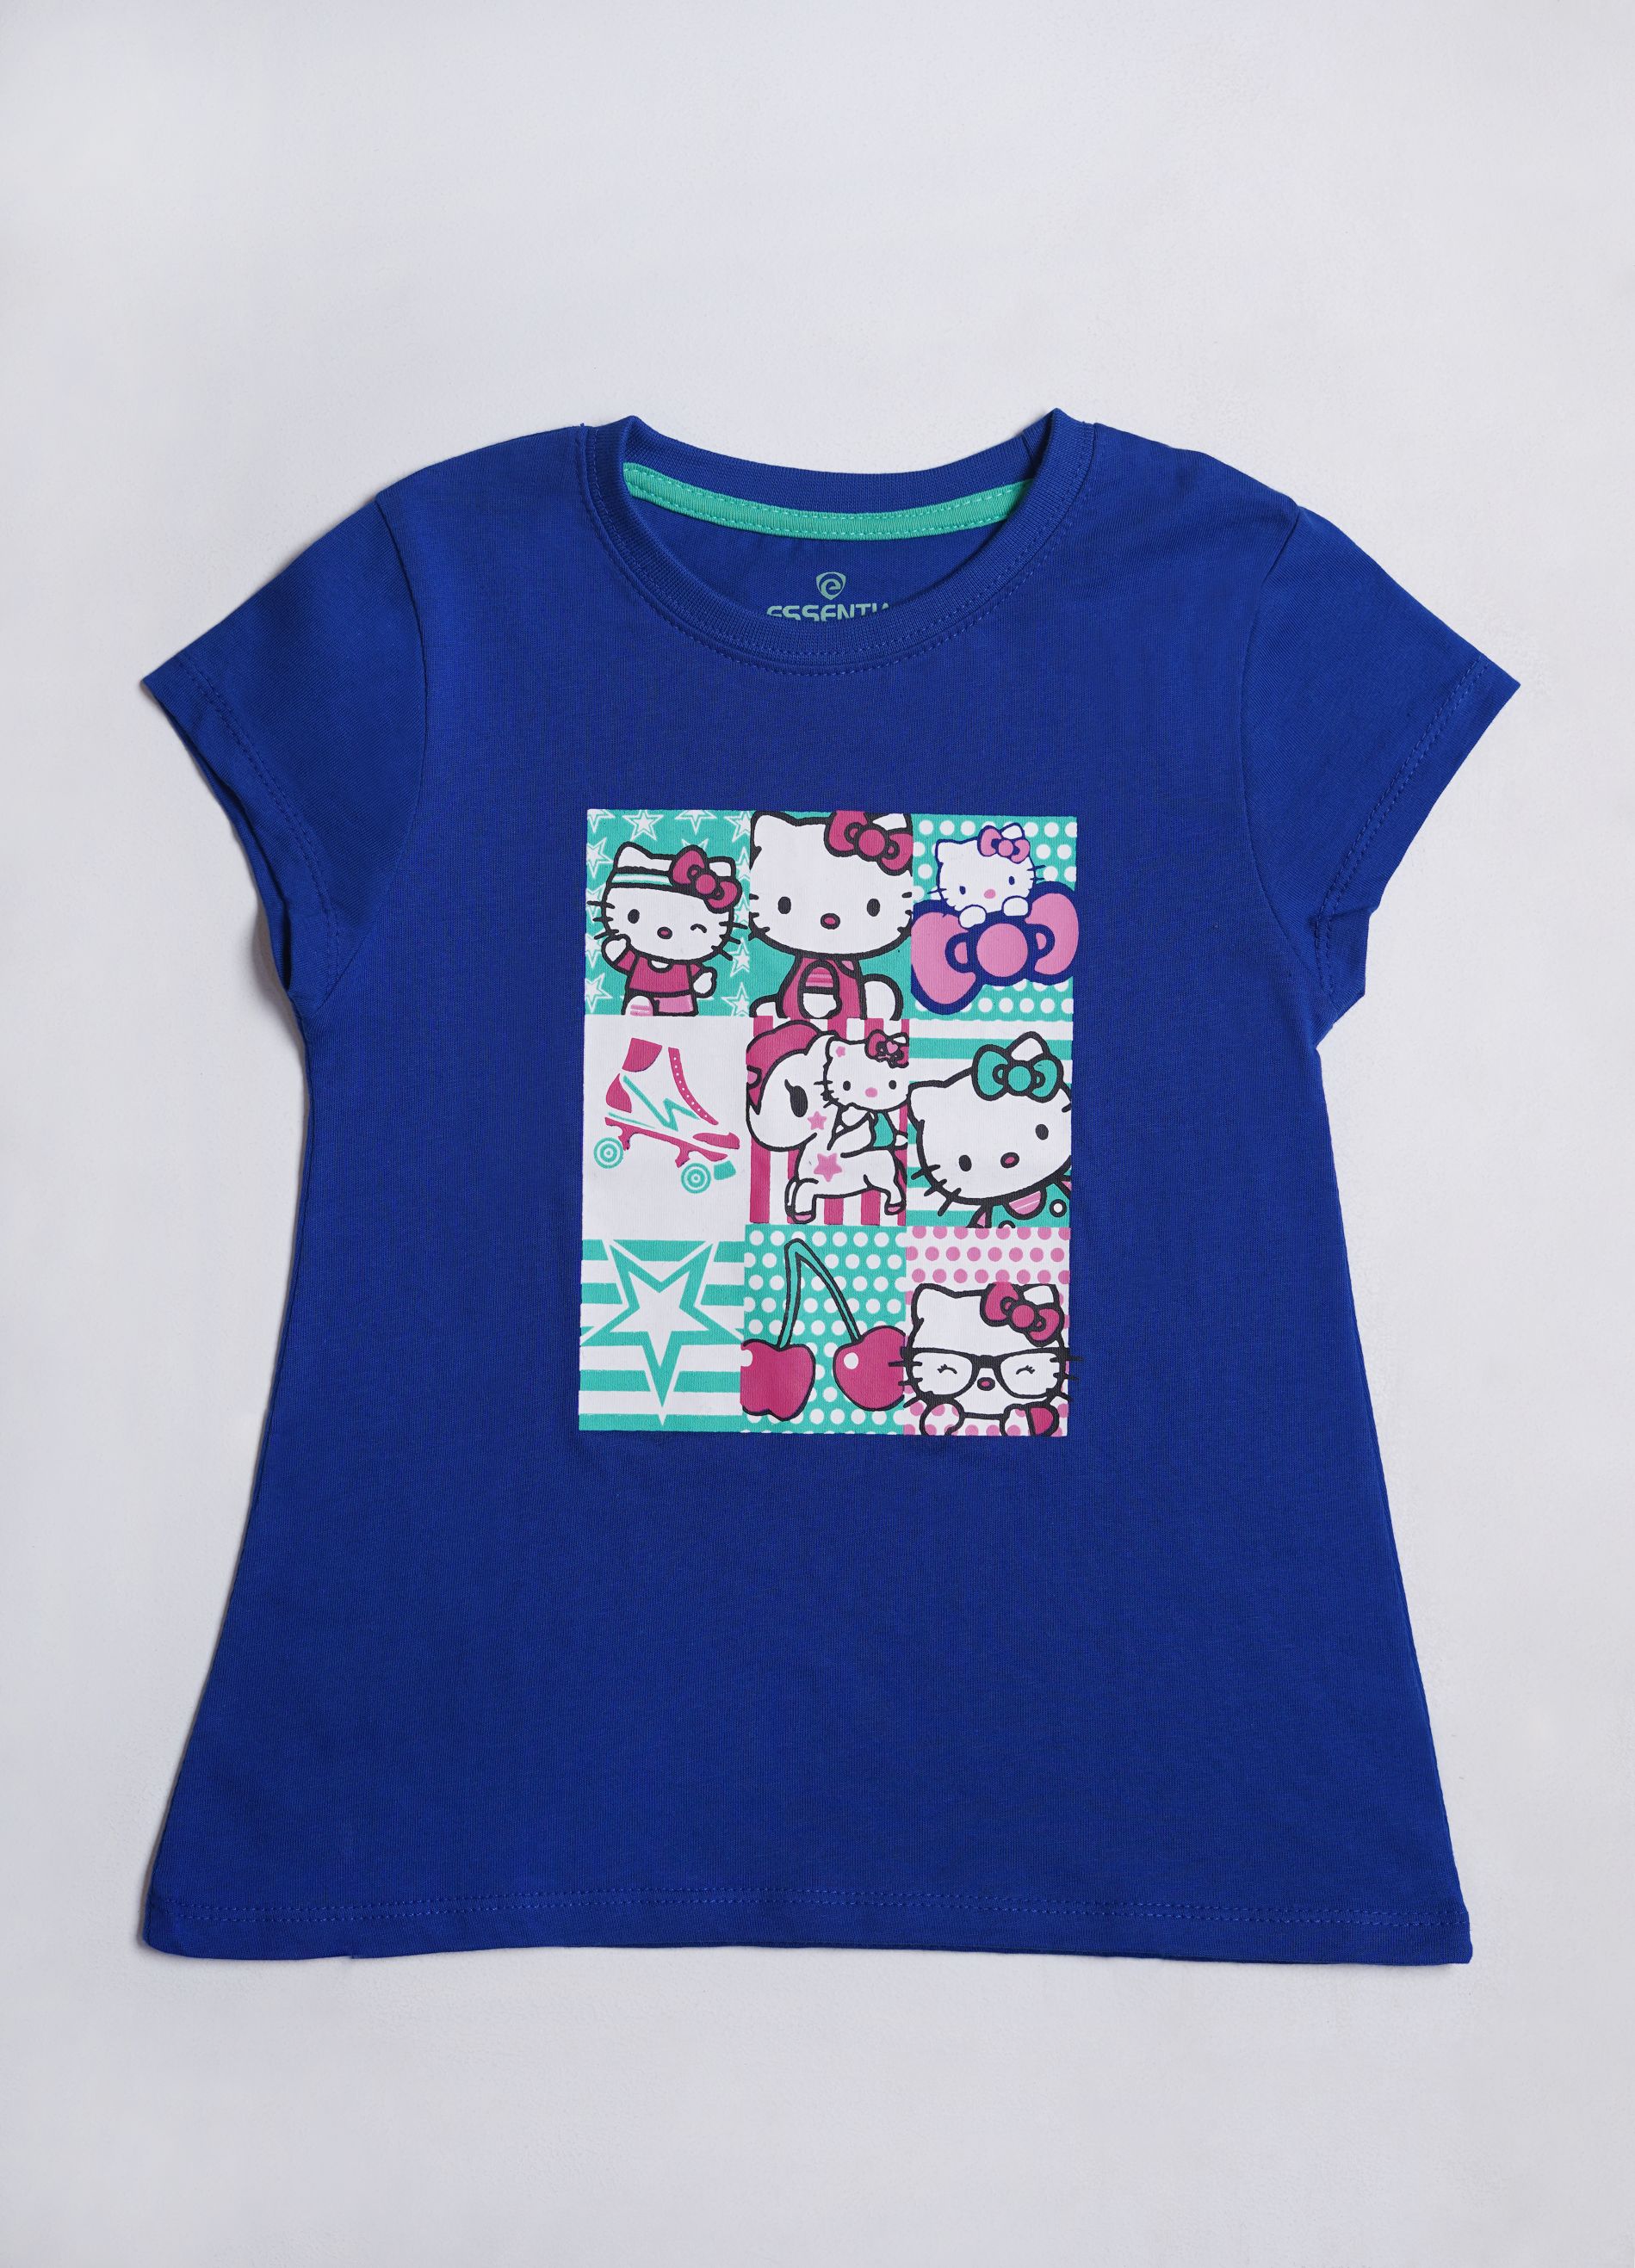 Hello Kitty My Little Pony Tee for Girls